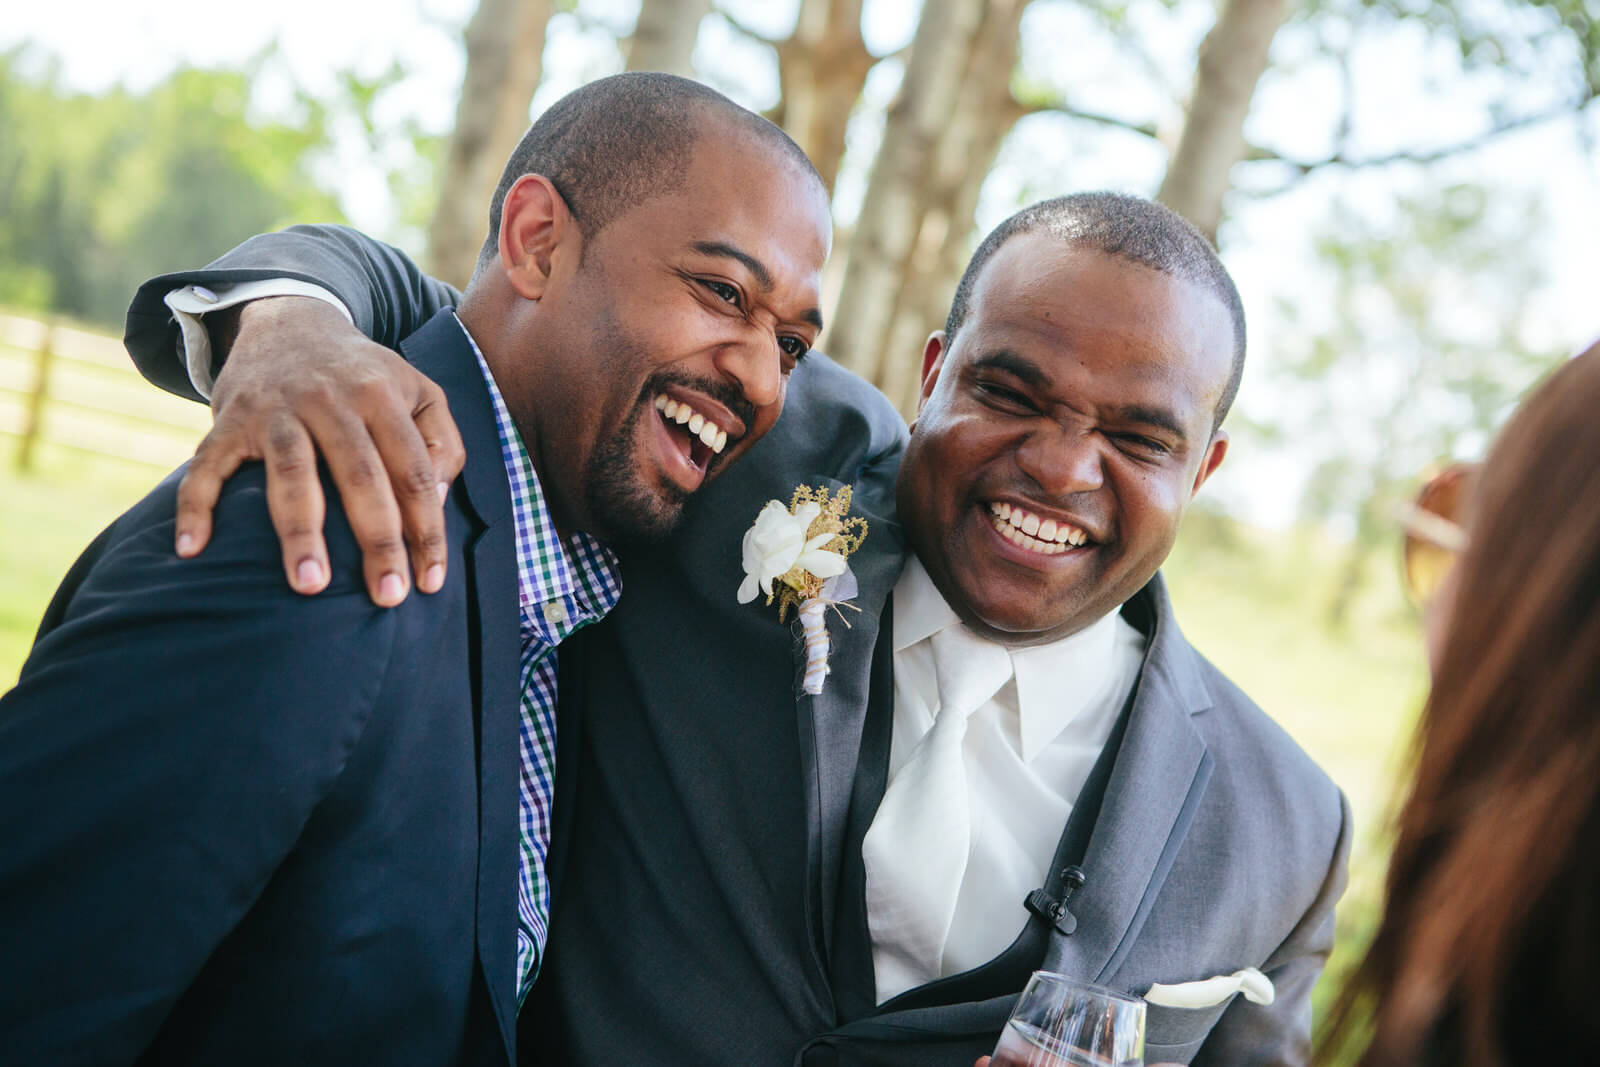 A groom laughs with a friend on his wedding day at Sky Ridge Ranch in Ronan Montana